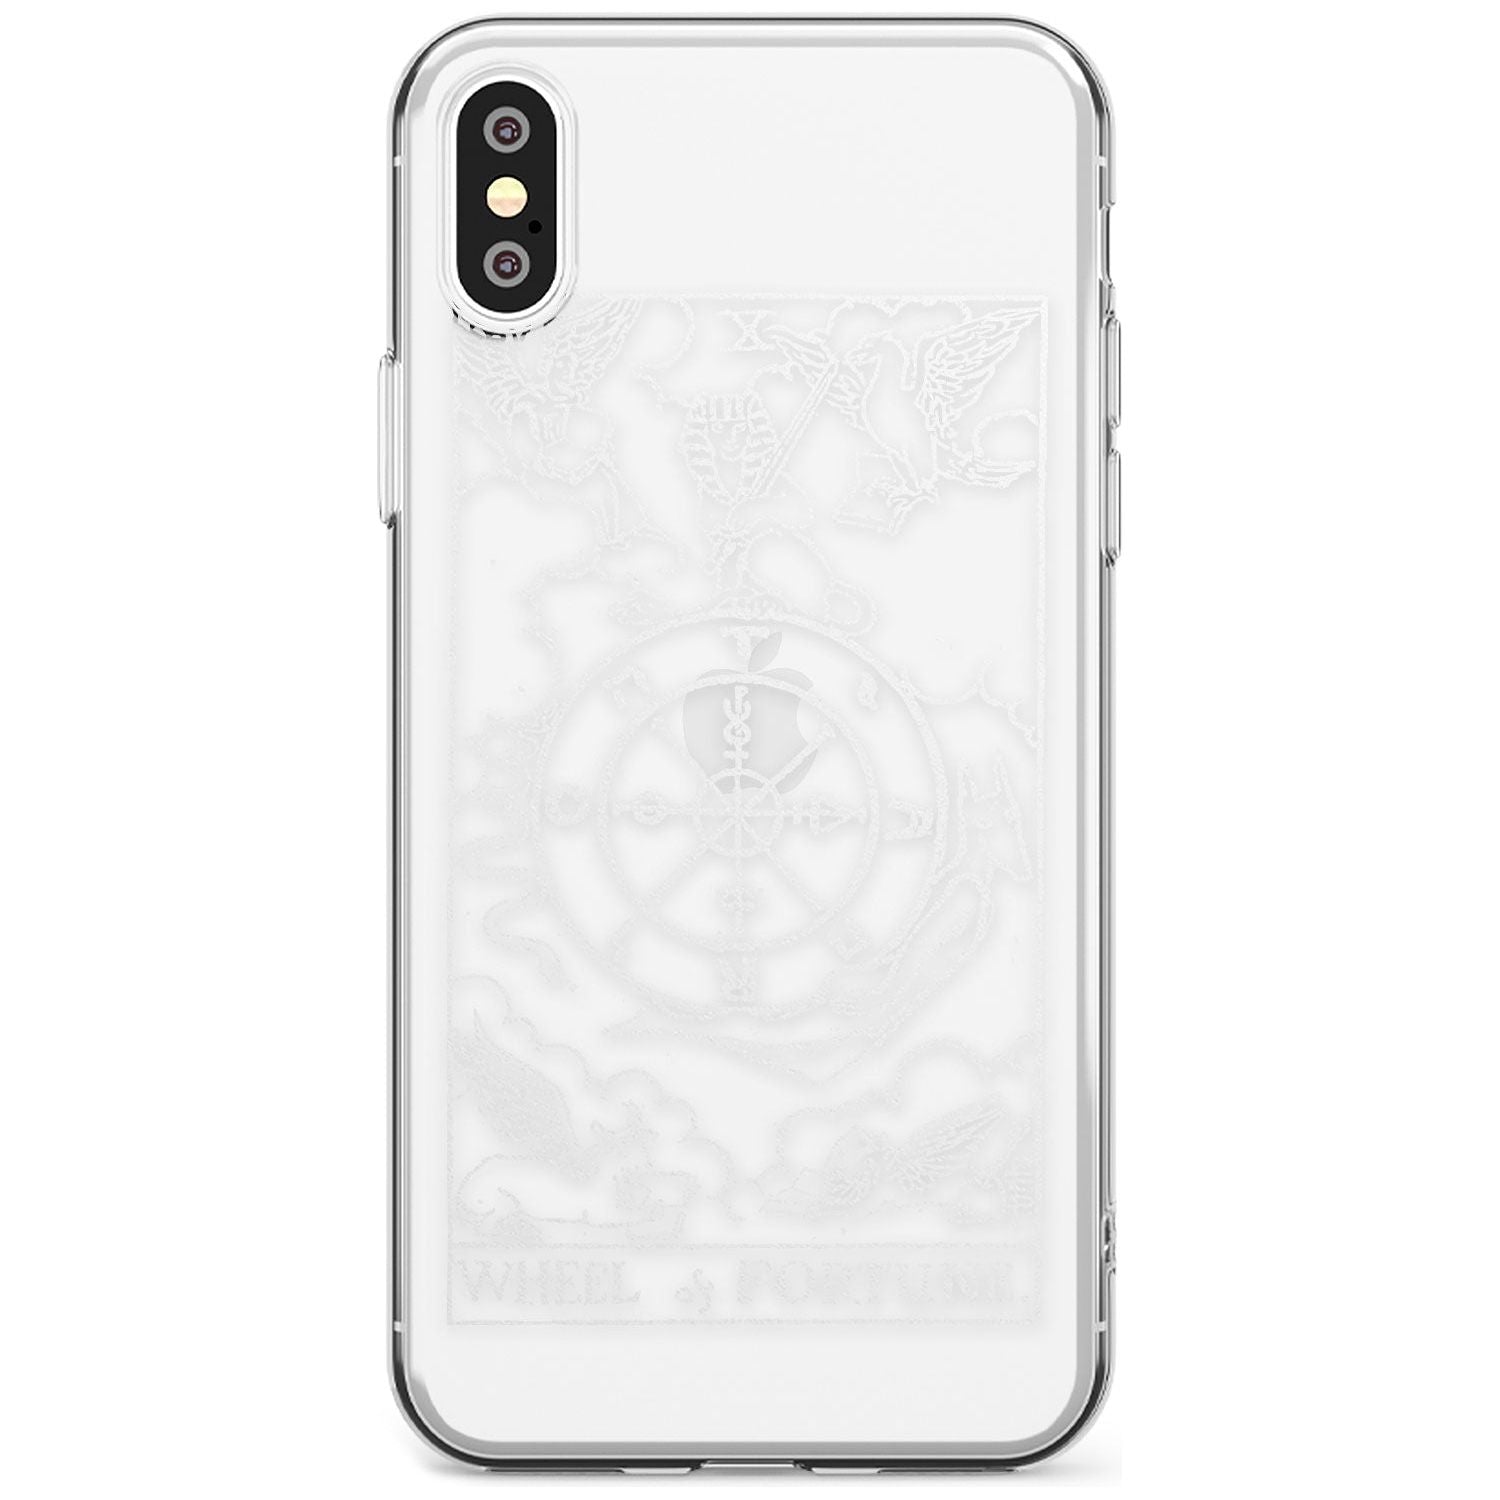 Wheel of Fortune Tarot Card - White Transparent Black Impact Phone Case for iPhone X XS Max XR